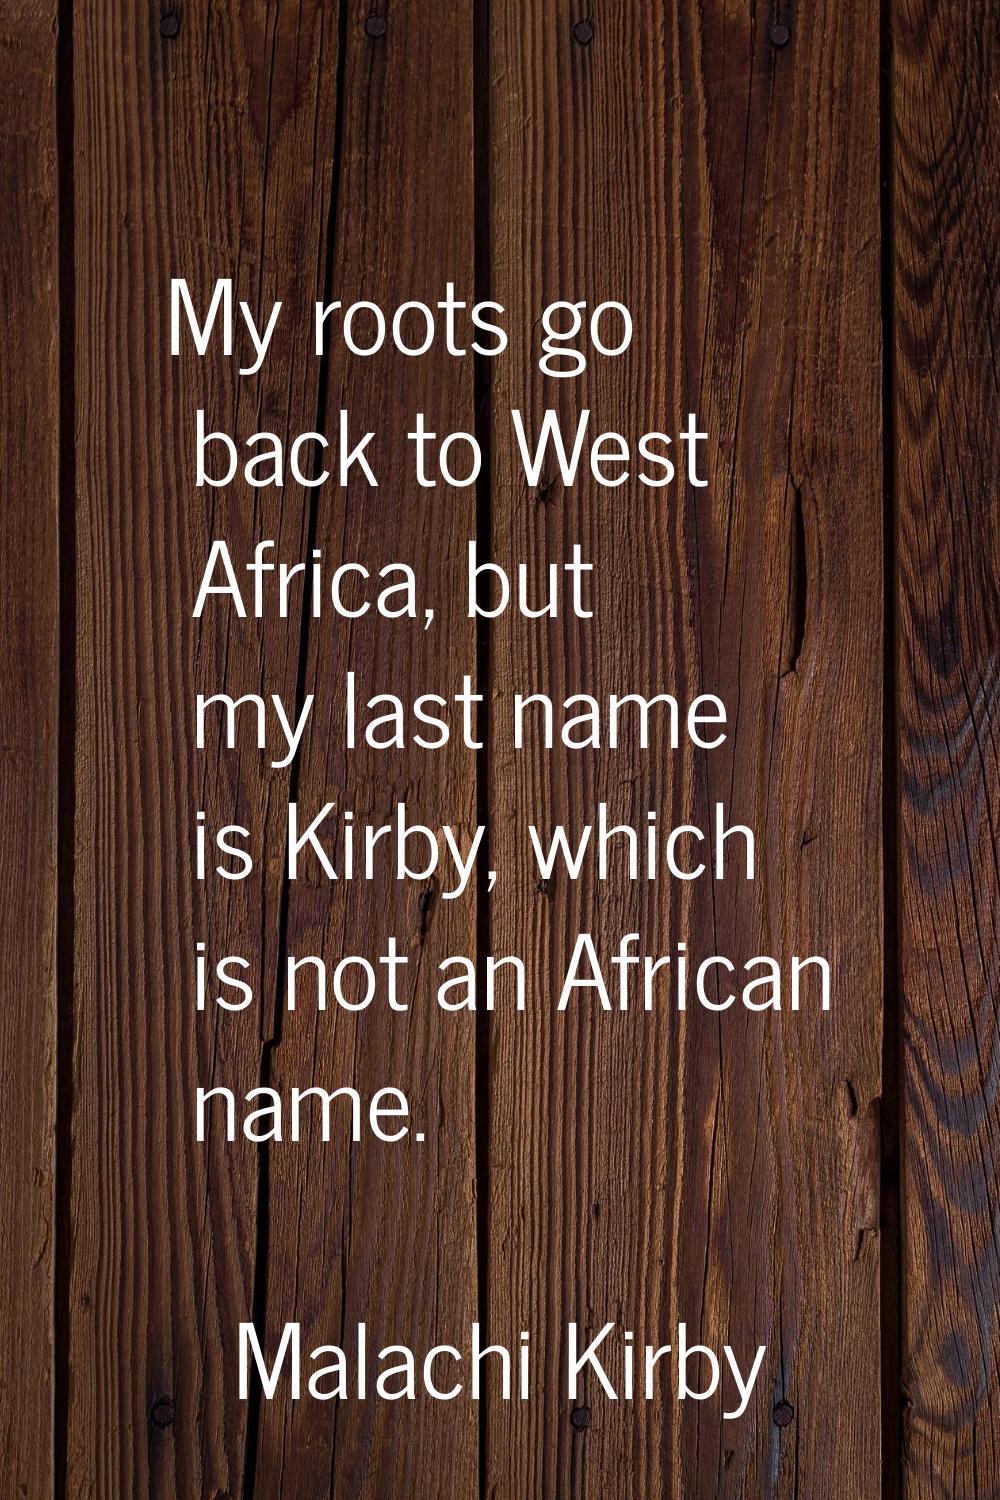 My roots go back to West Africa, but my last name is Kirby, which is not an African name.